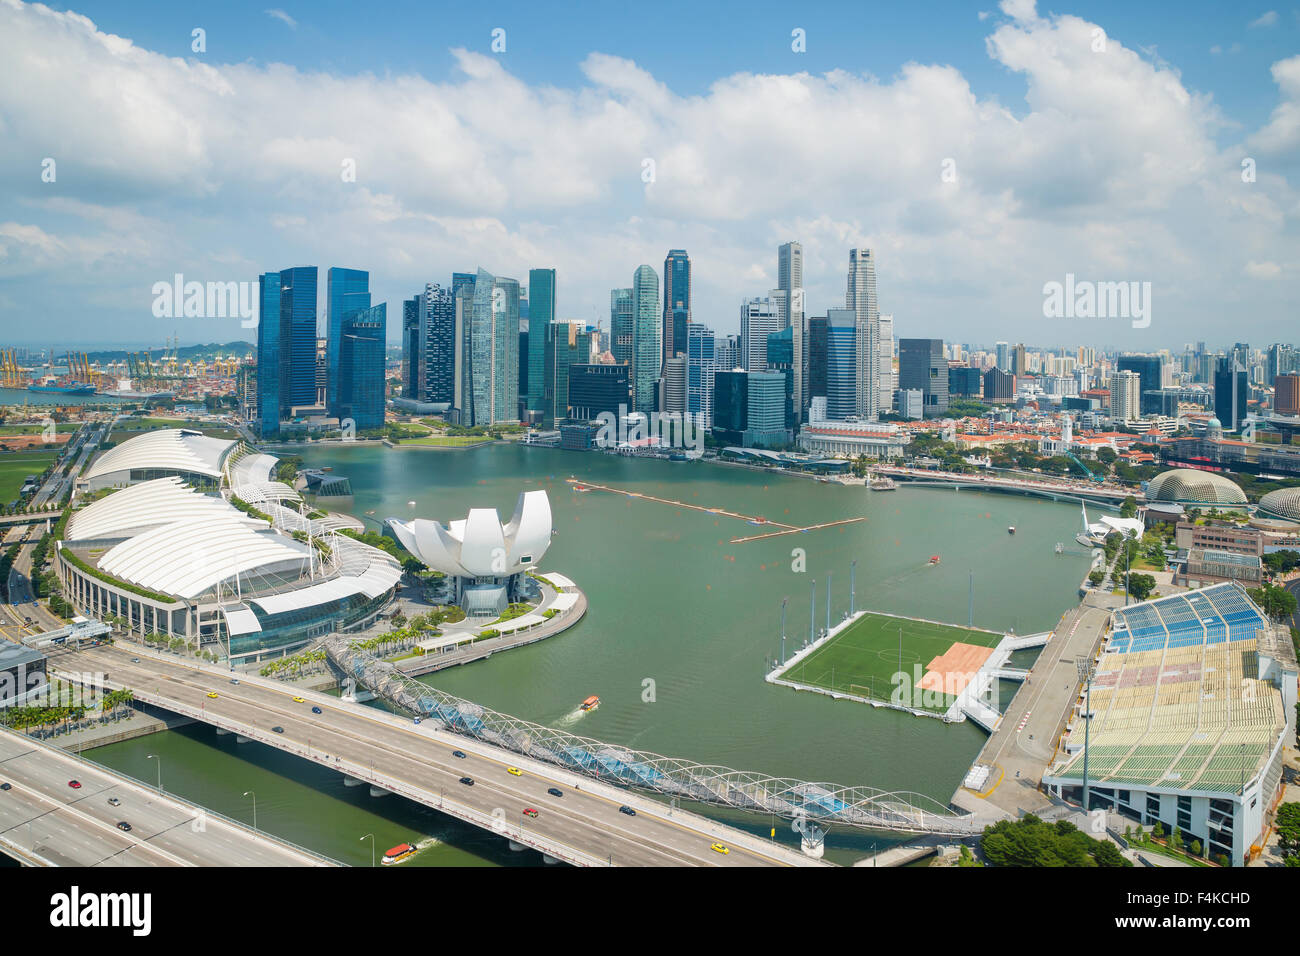 Aerial view of Singapore in downtown district Stock Photo